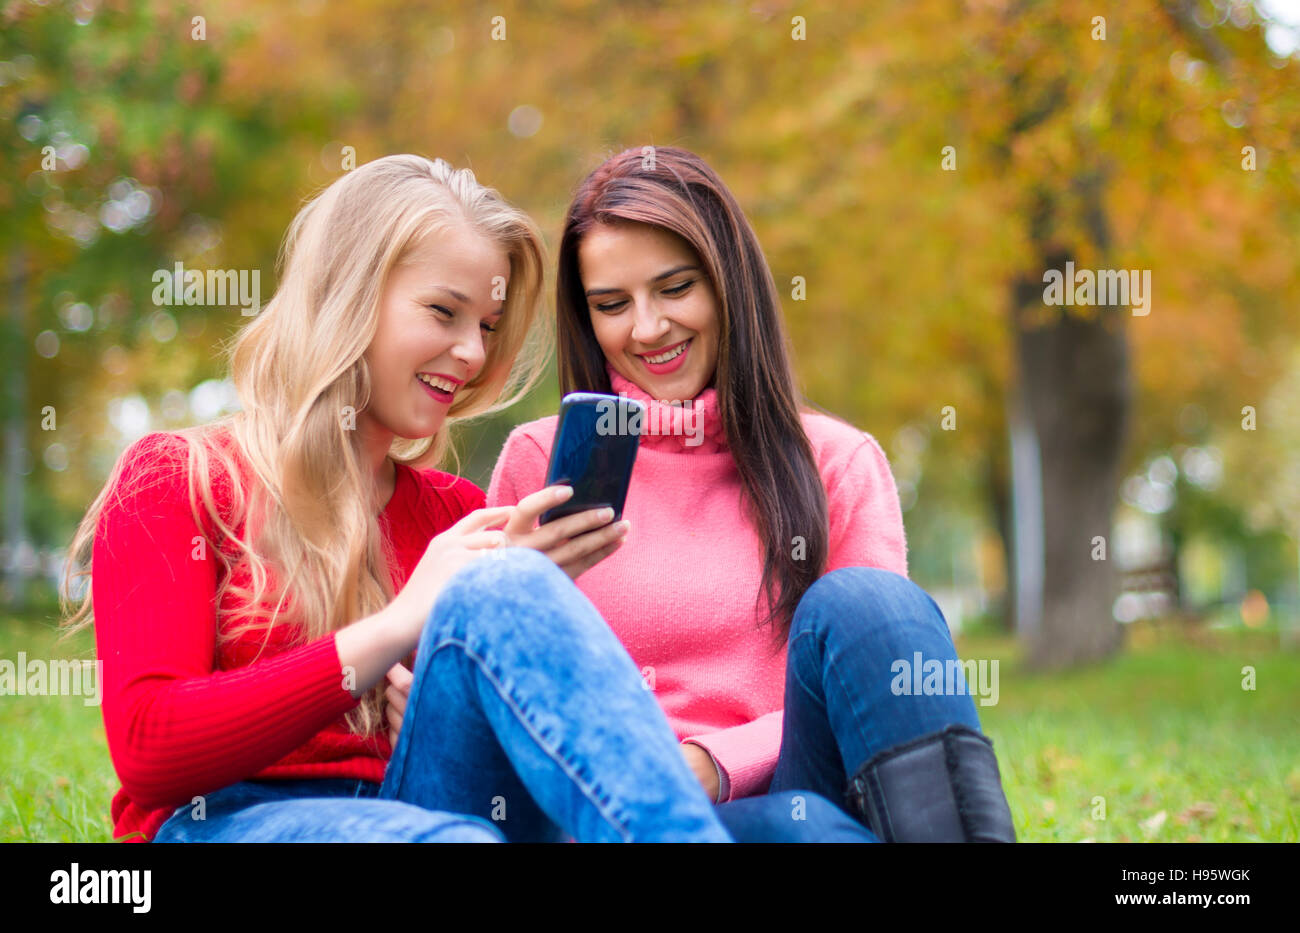 Two girls in park with a mobile phone Stock Photo